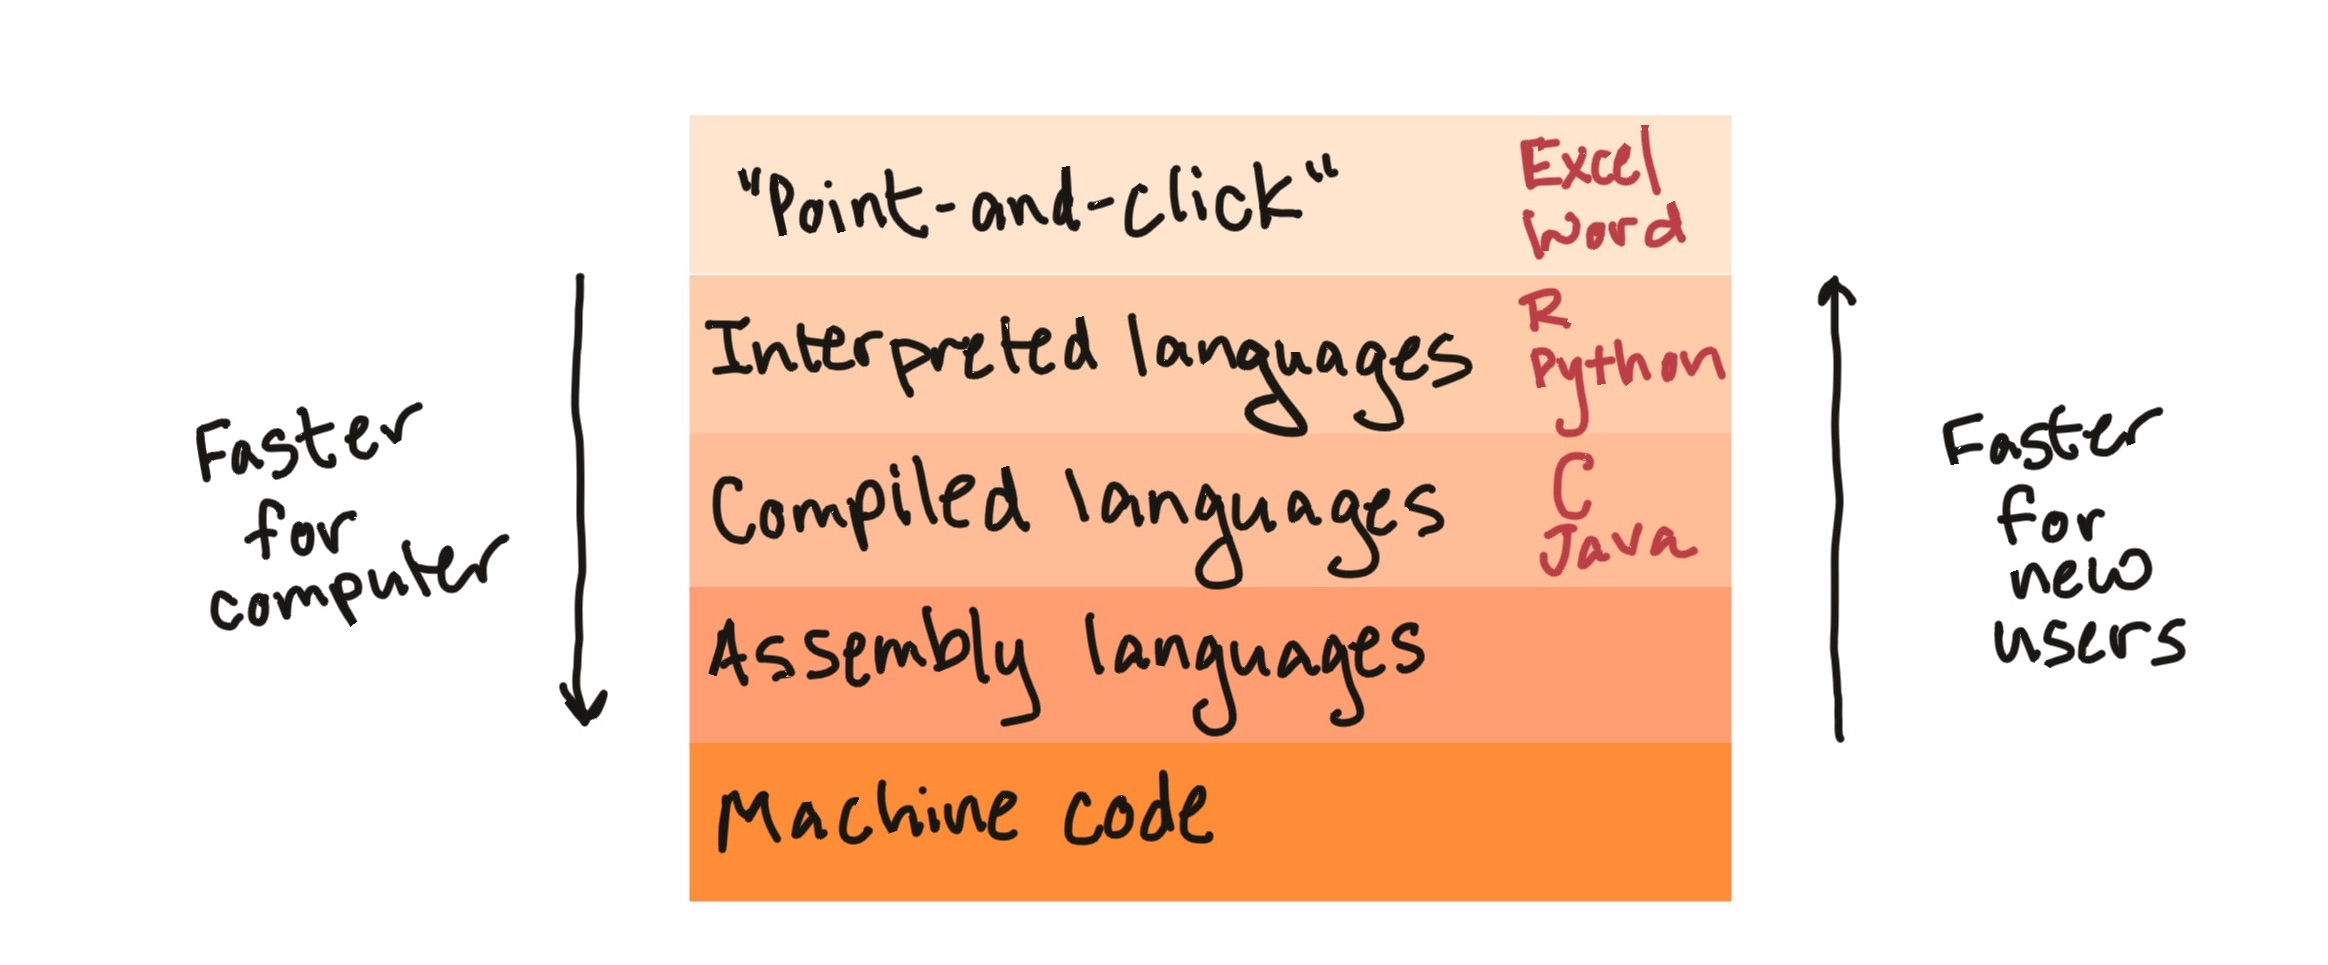 Broad types of software programs. R is an interpreted language. 'Point-and-click' programs, like Excel and Word, are often easiest for a new user to get started with, but are slower for the computer and are restricted in the functionality they offer. By contrast, compiled languages (like C and Java), assembly languages, and machine code are faster for the computer and allow you to create a wider range of things, but can take longer to code and take longer for a new user to learn to work with.